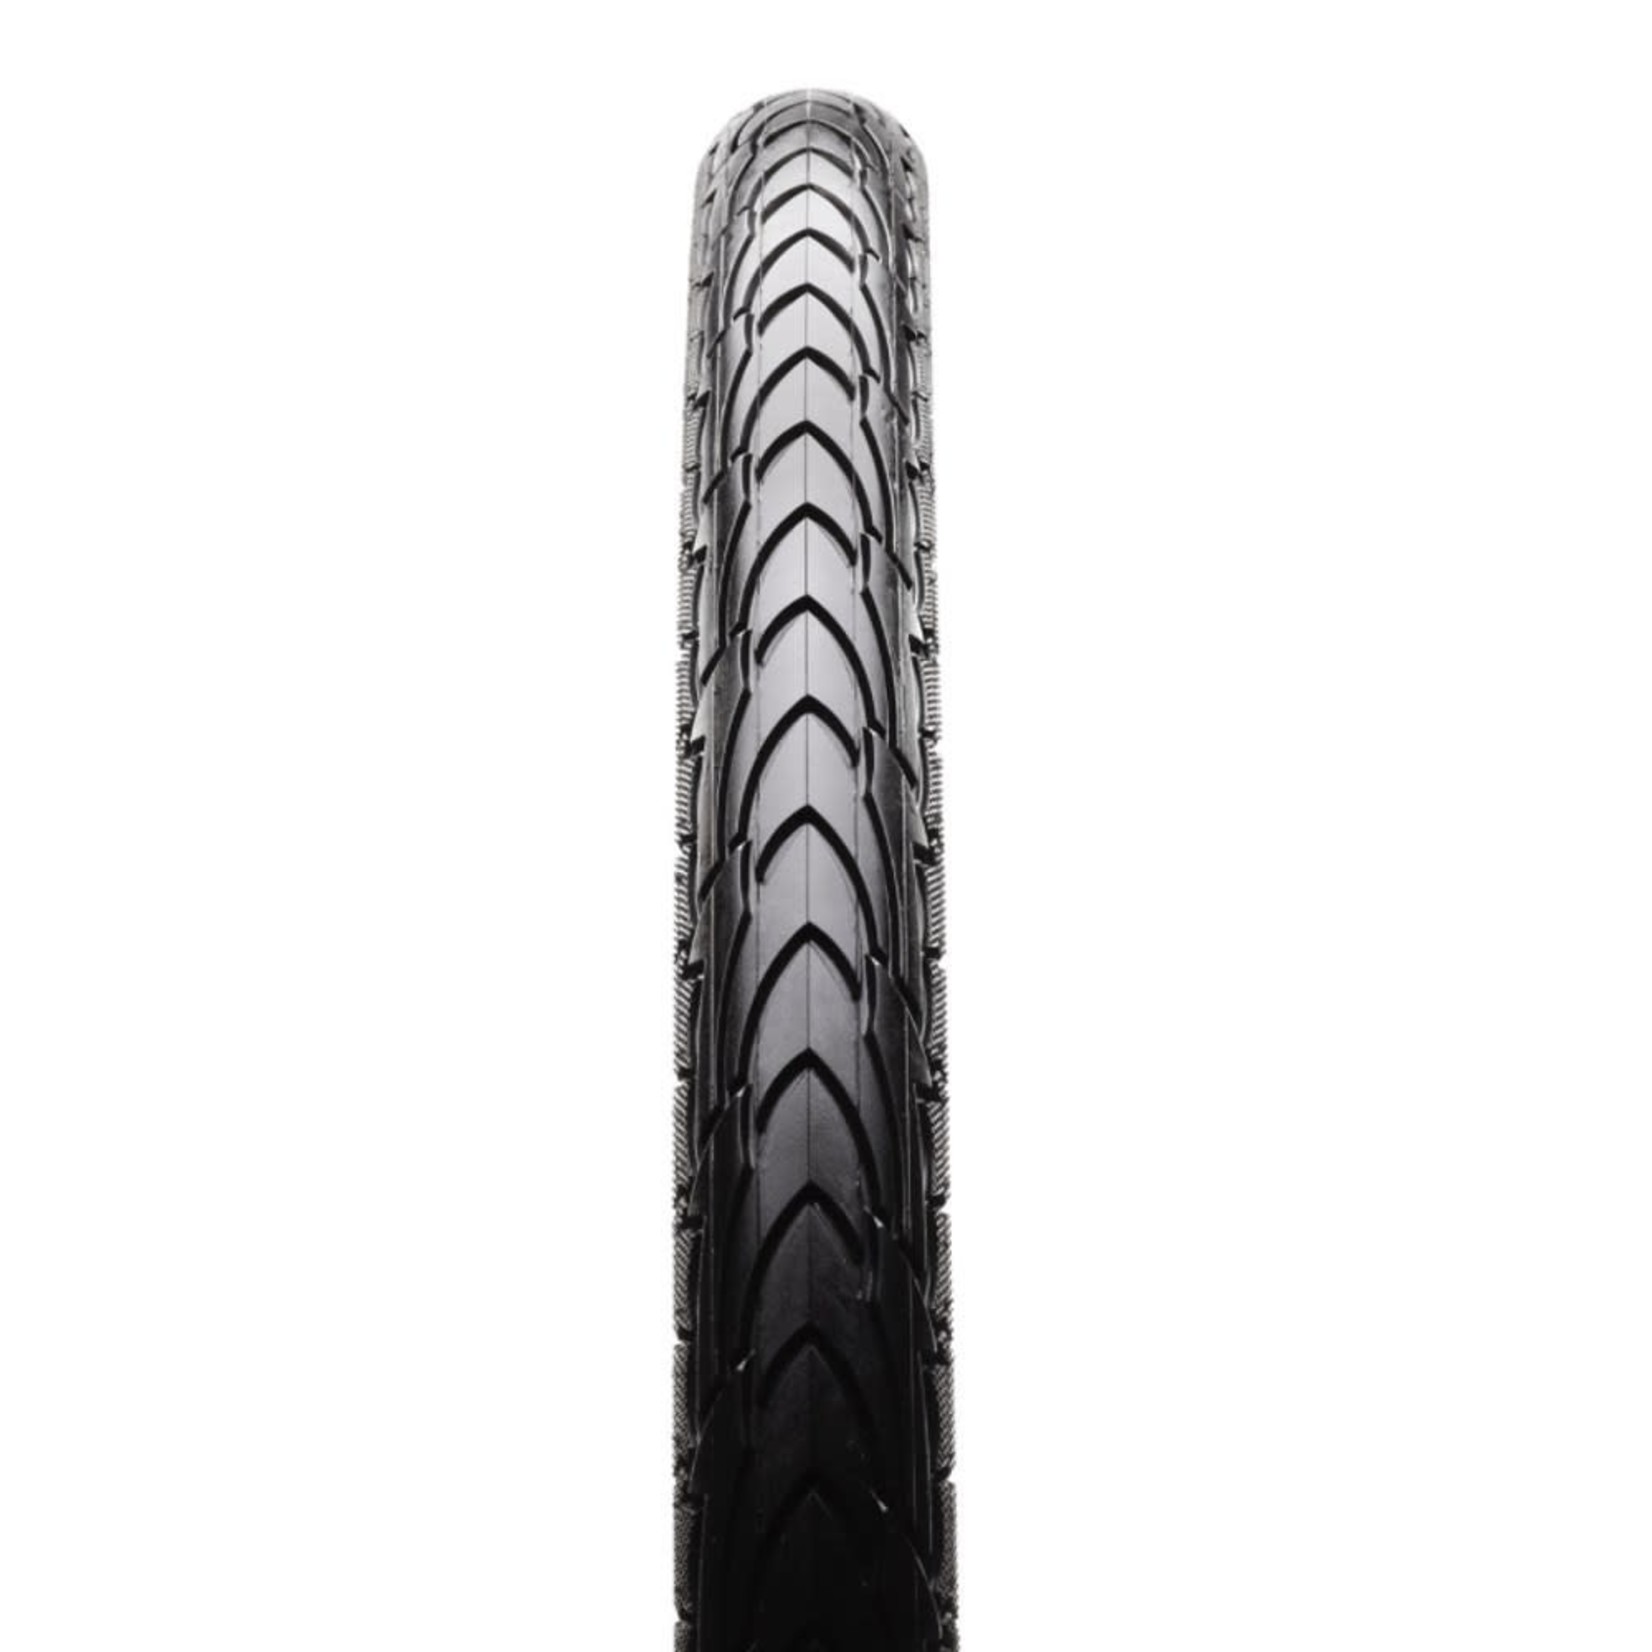 Maxxis Maxxis Overdrive Bike Tyre - 700X35C- 60TPI Silkshield Wire Bead Tyre - Pair